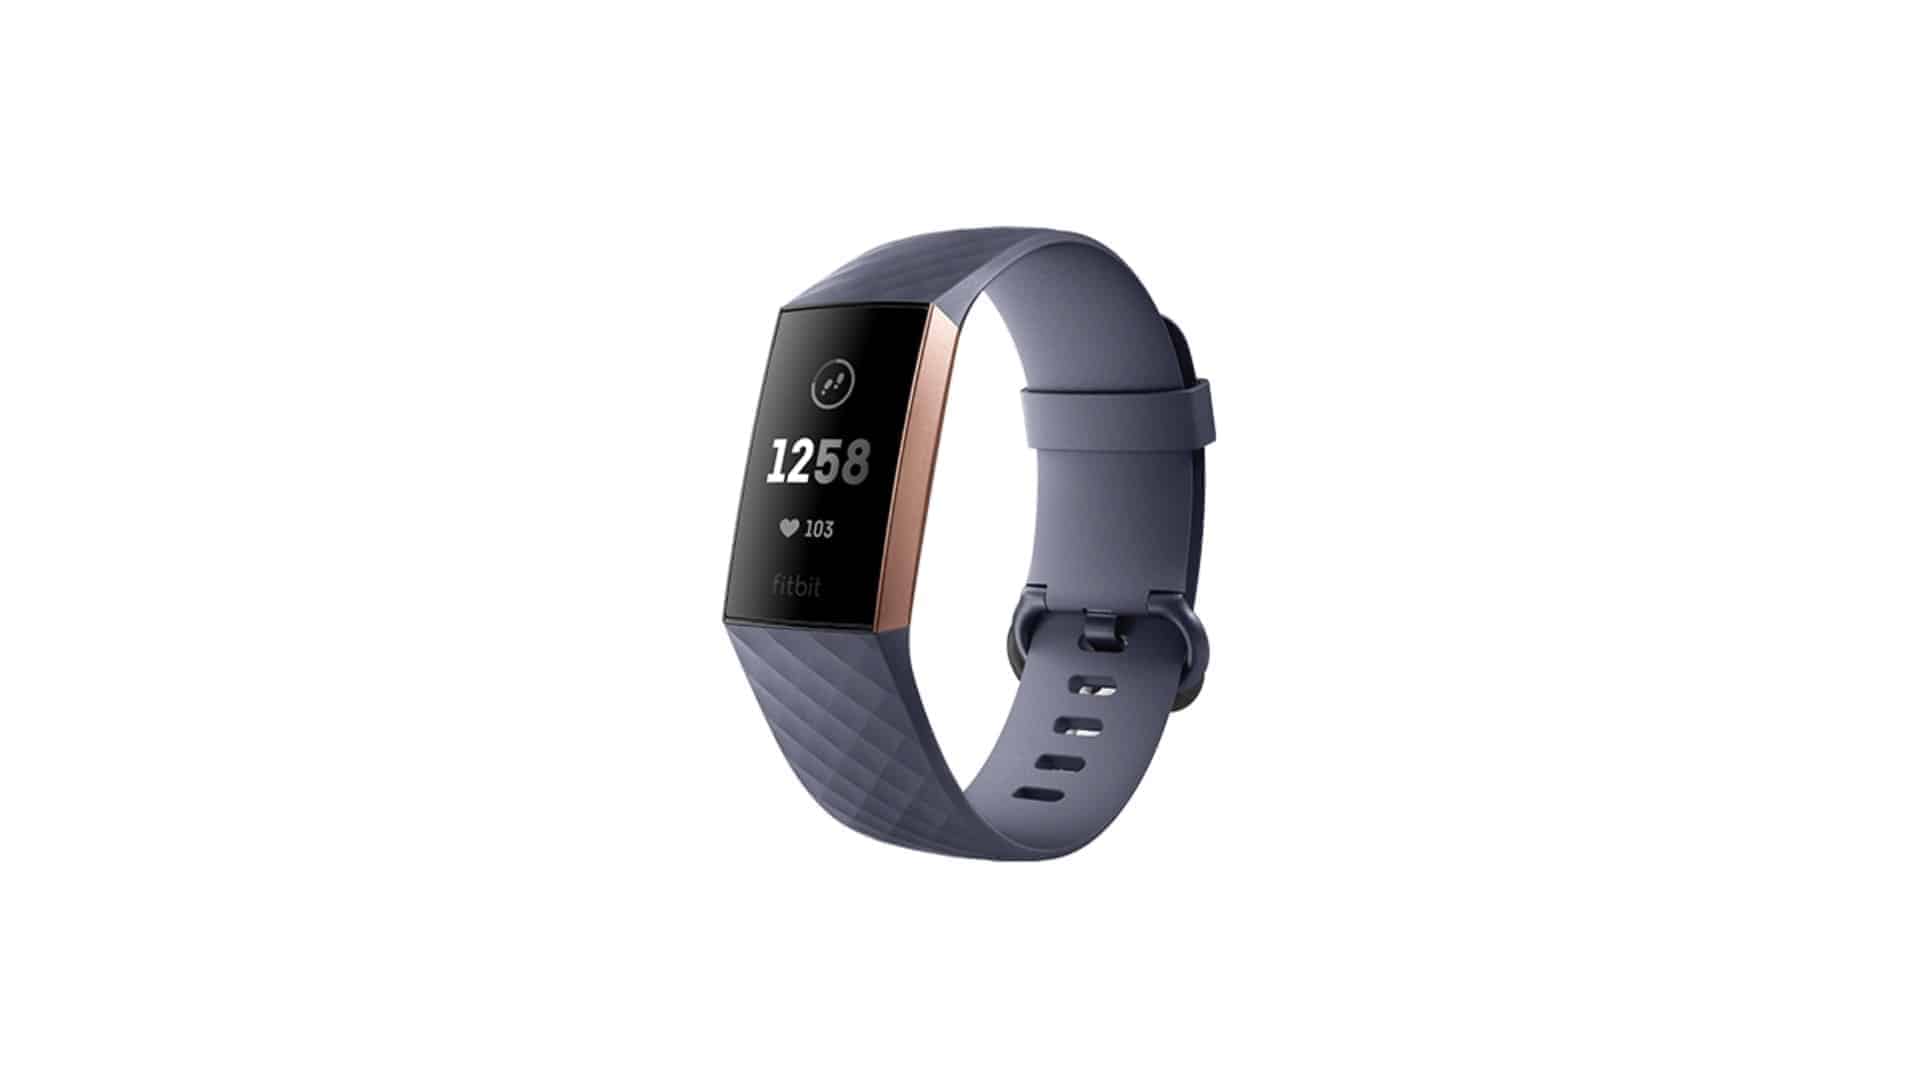 FitBit Heart Rate Monitor